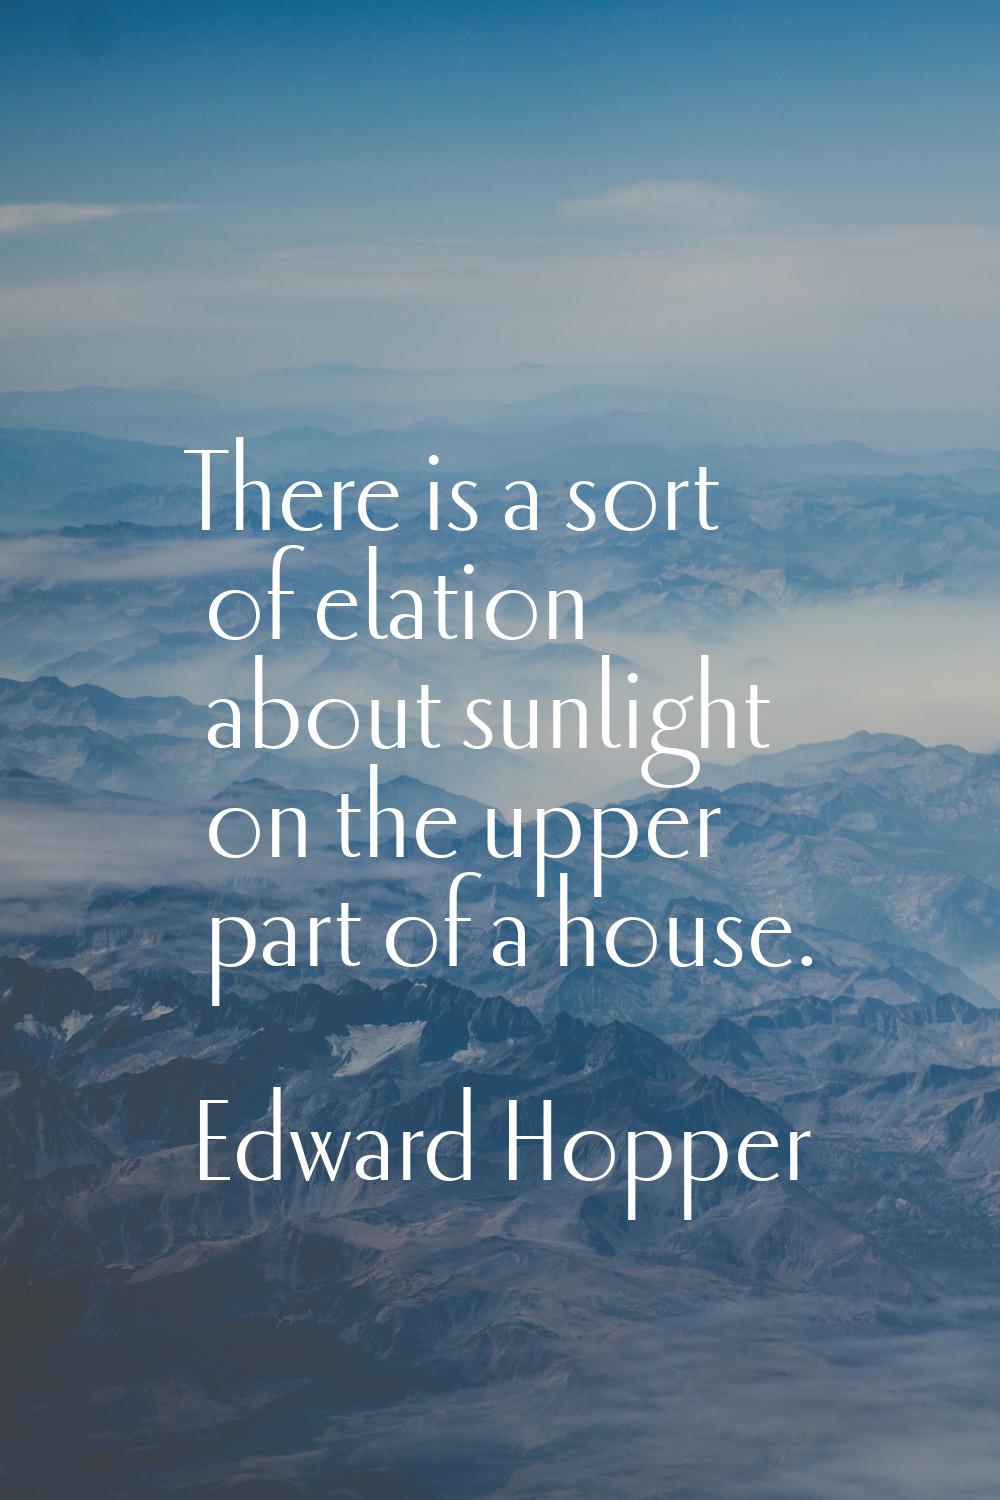 There is a sort of elation about sunlight on the upper part of a house.